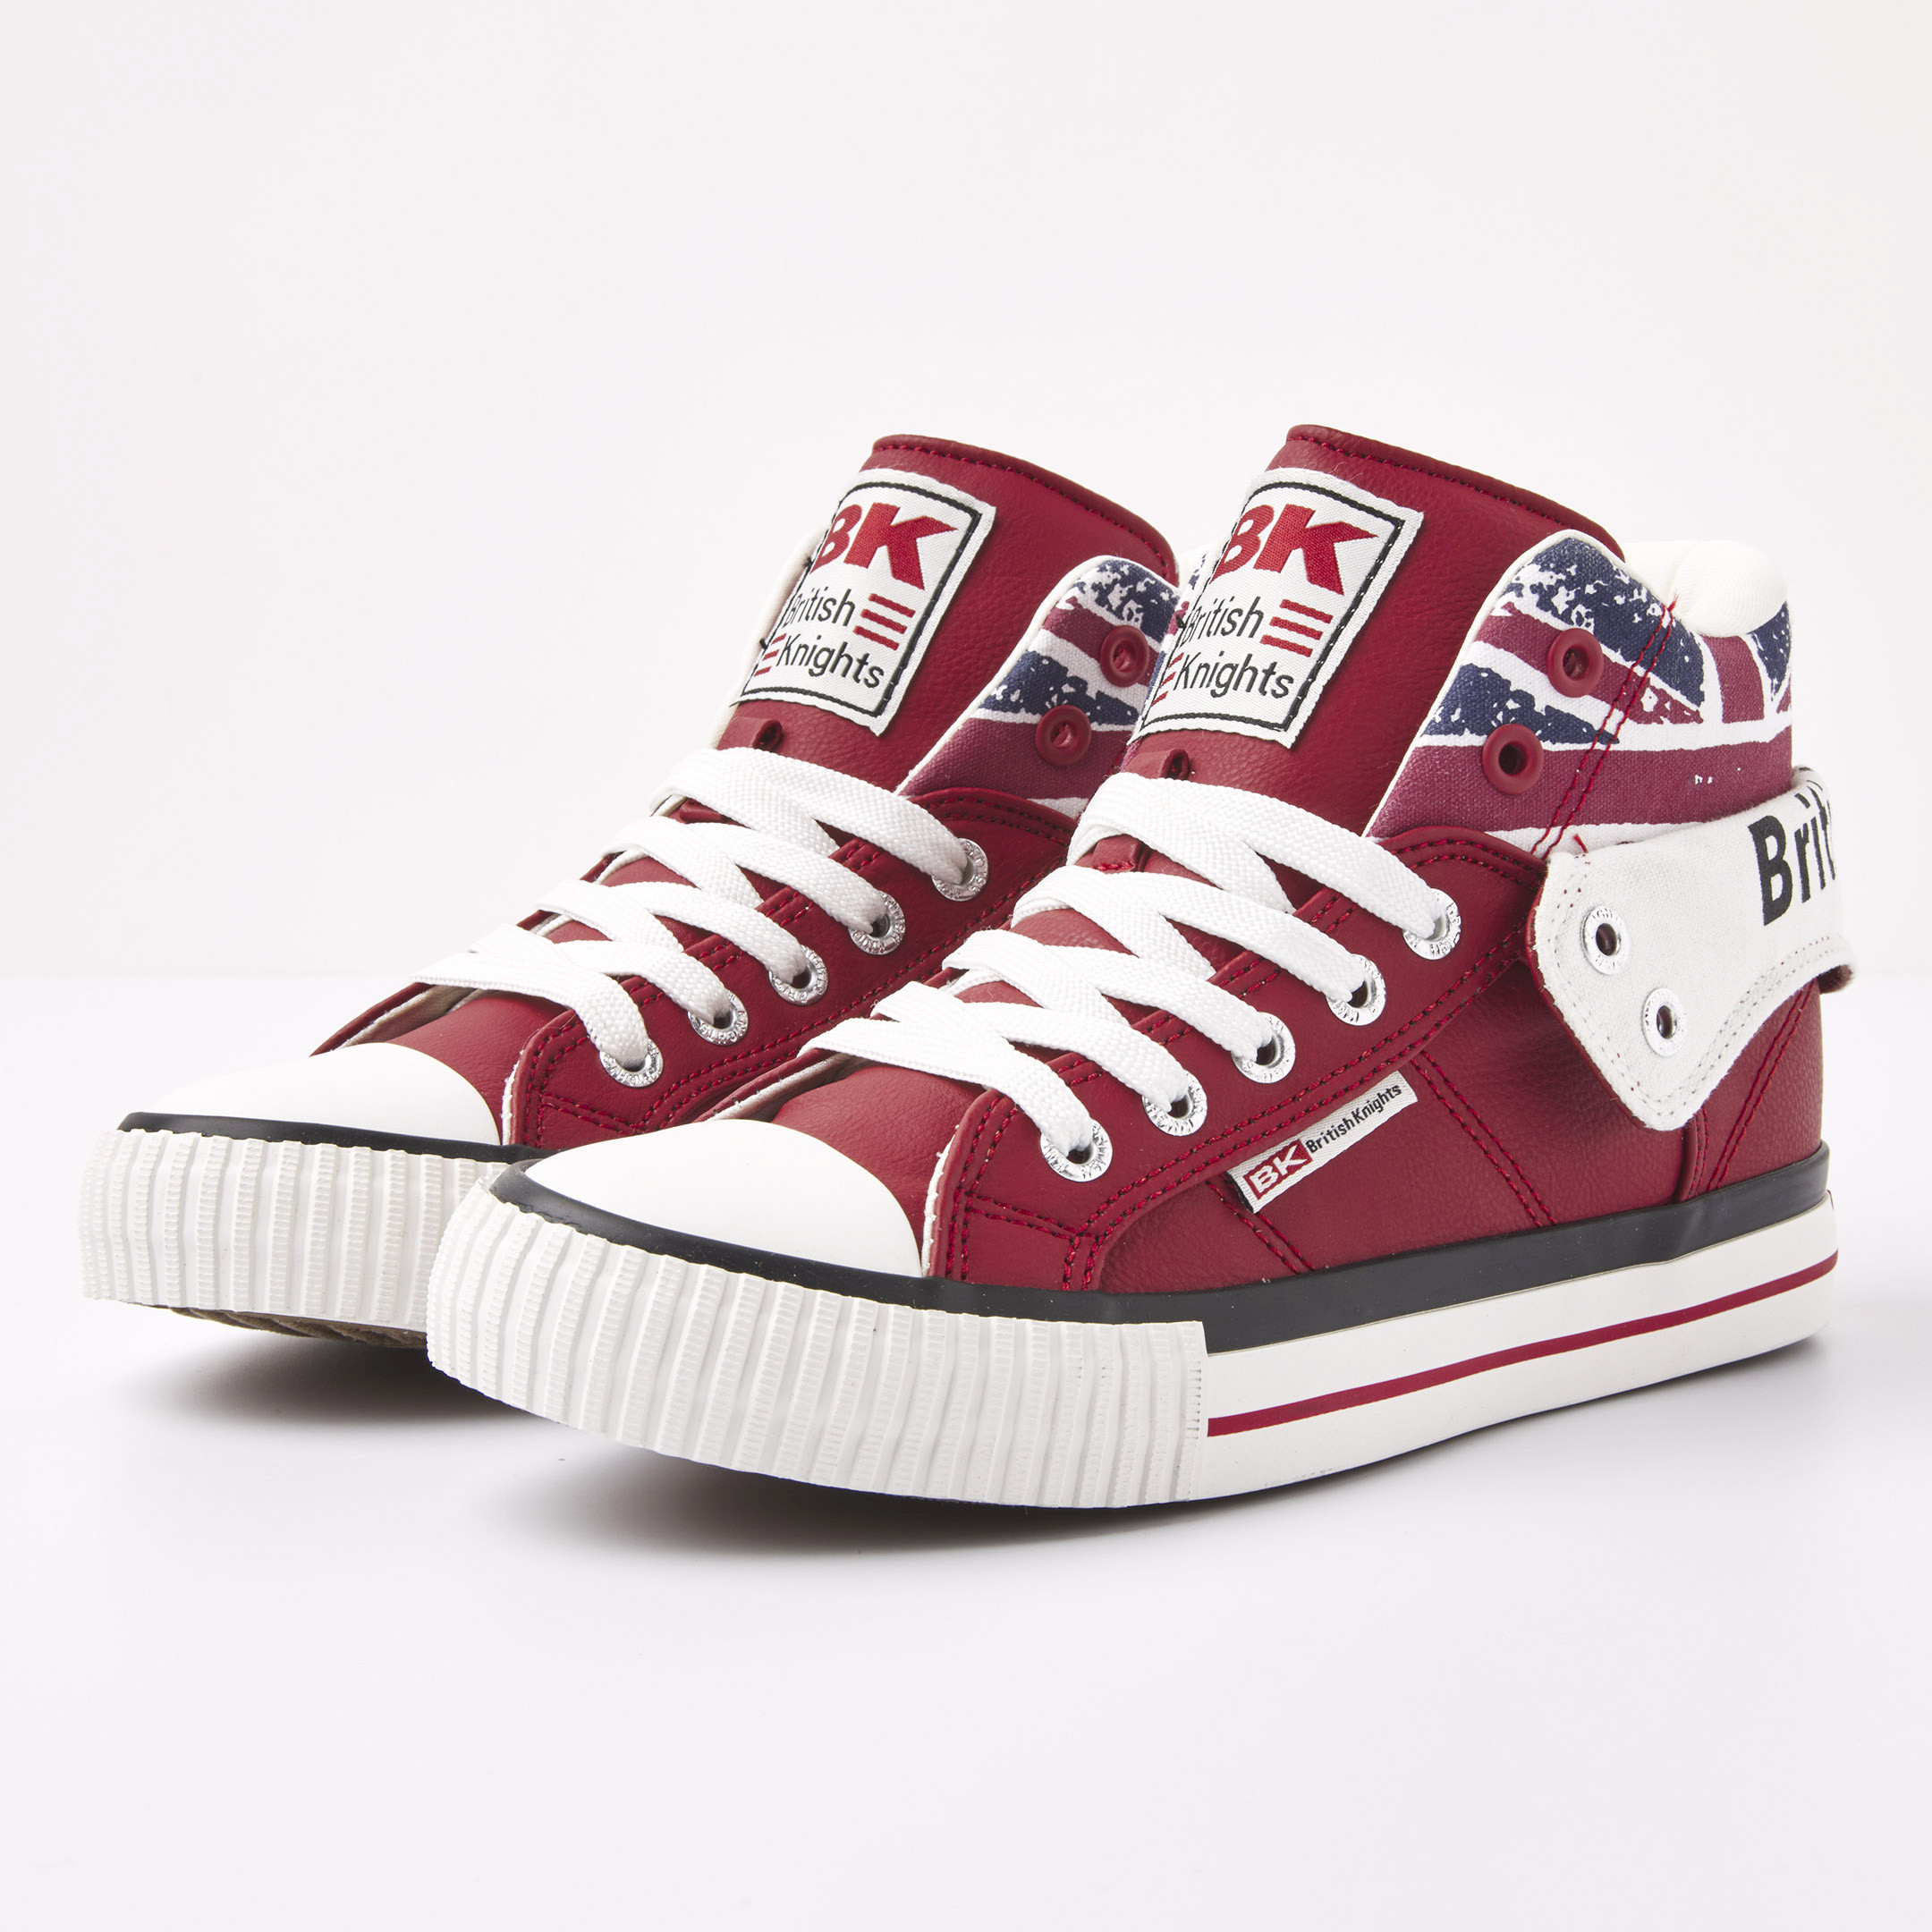 British Knights Sneaker Front view BKC-3702-02 ROCO HIGH-TOP FEMALE